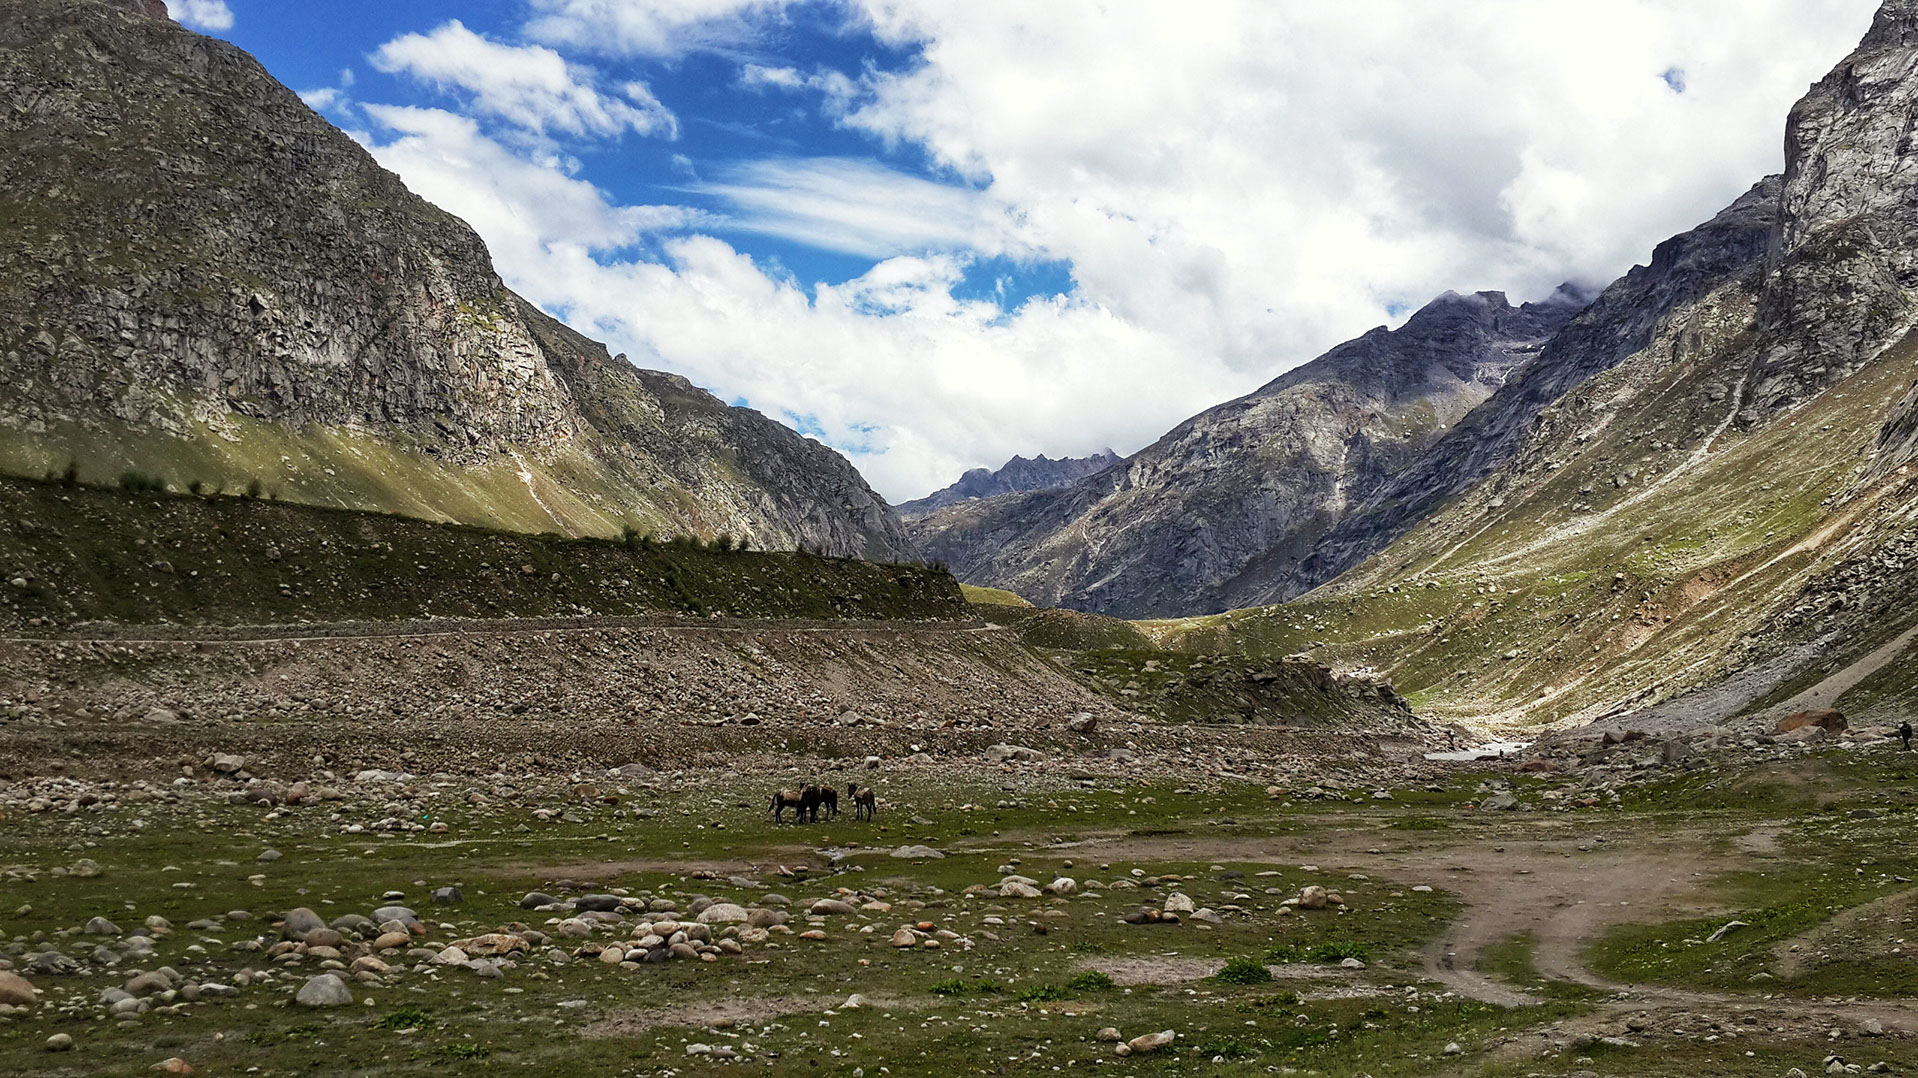 A final peek in the direction of the Hampta Pass and the sight of the beautiful mountains